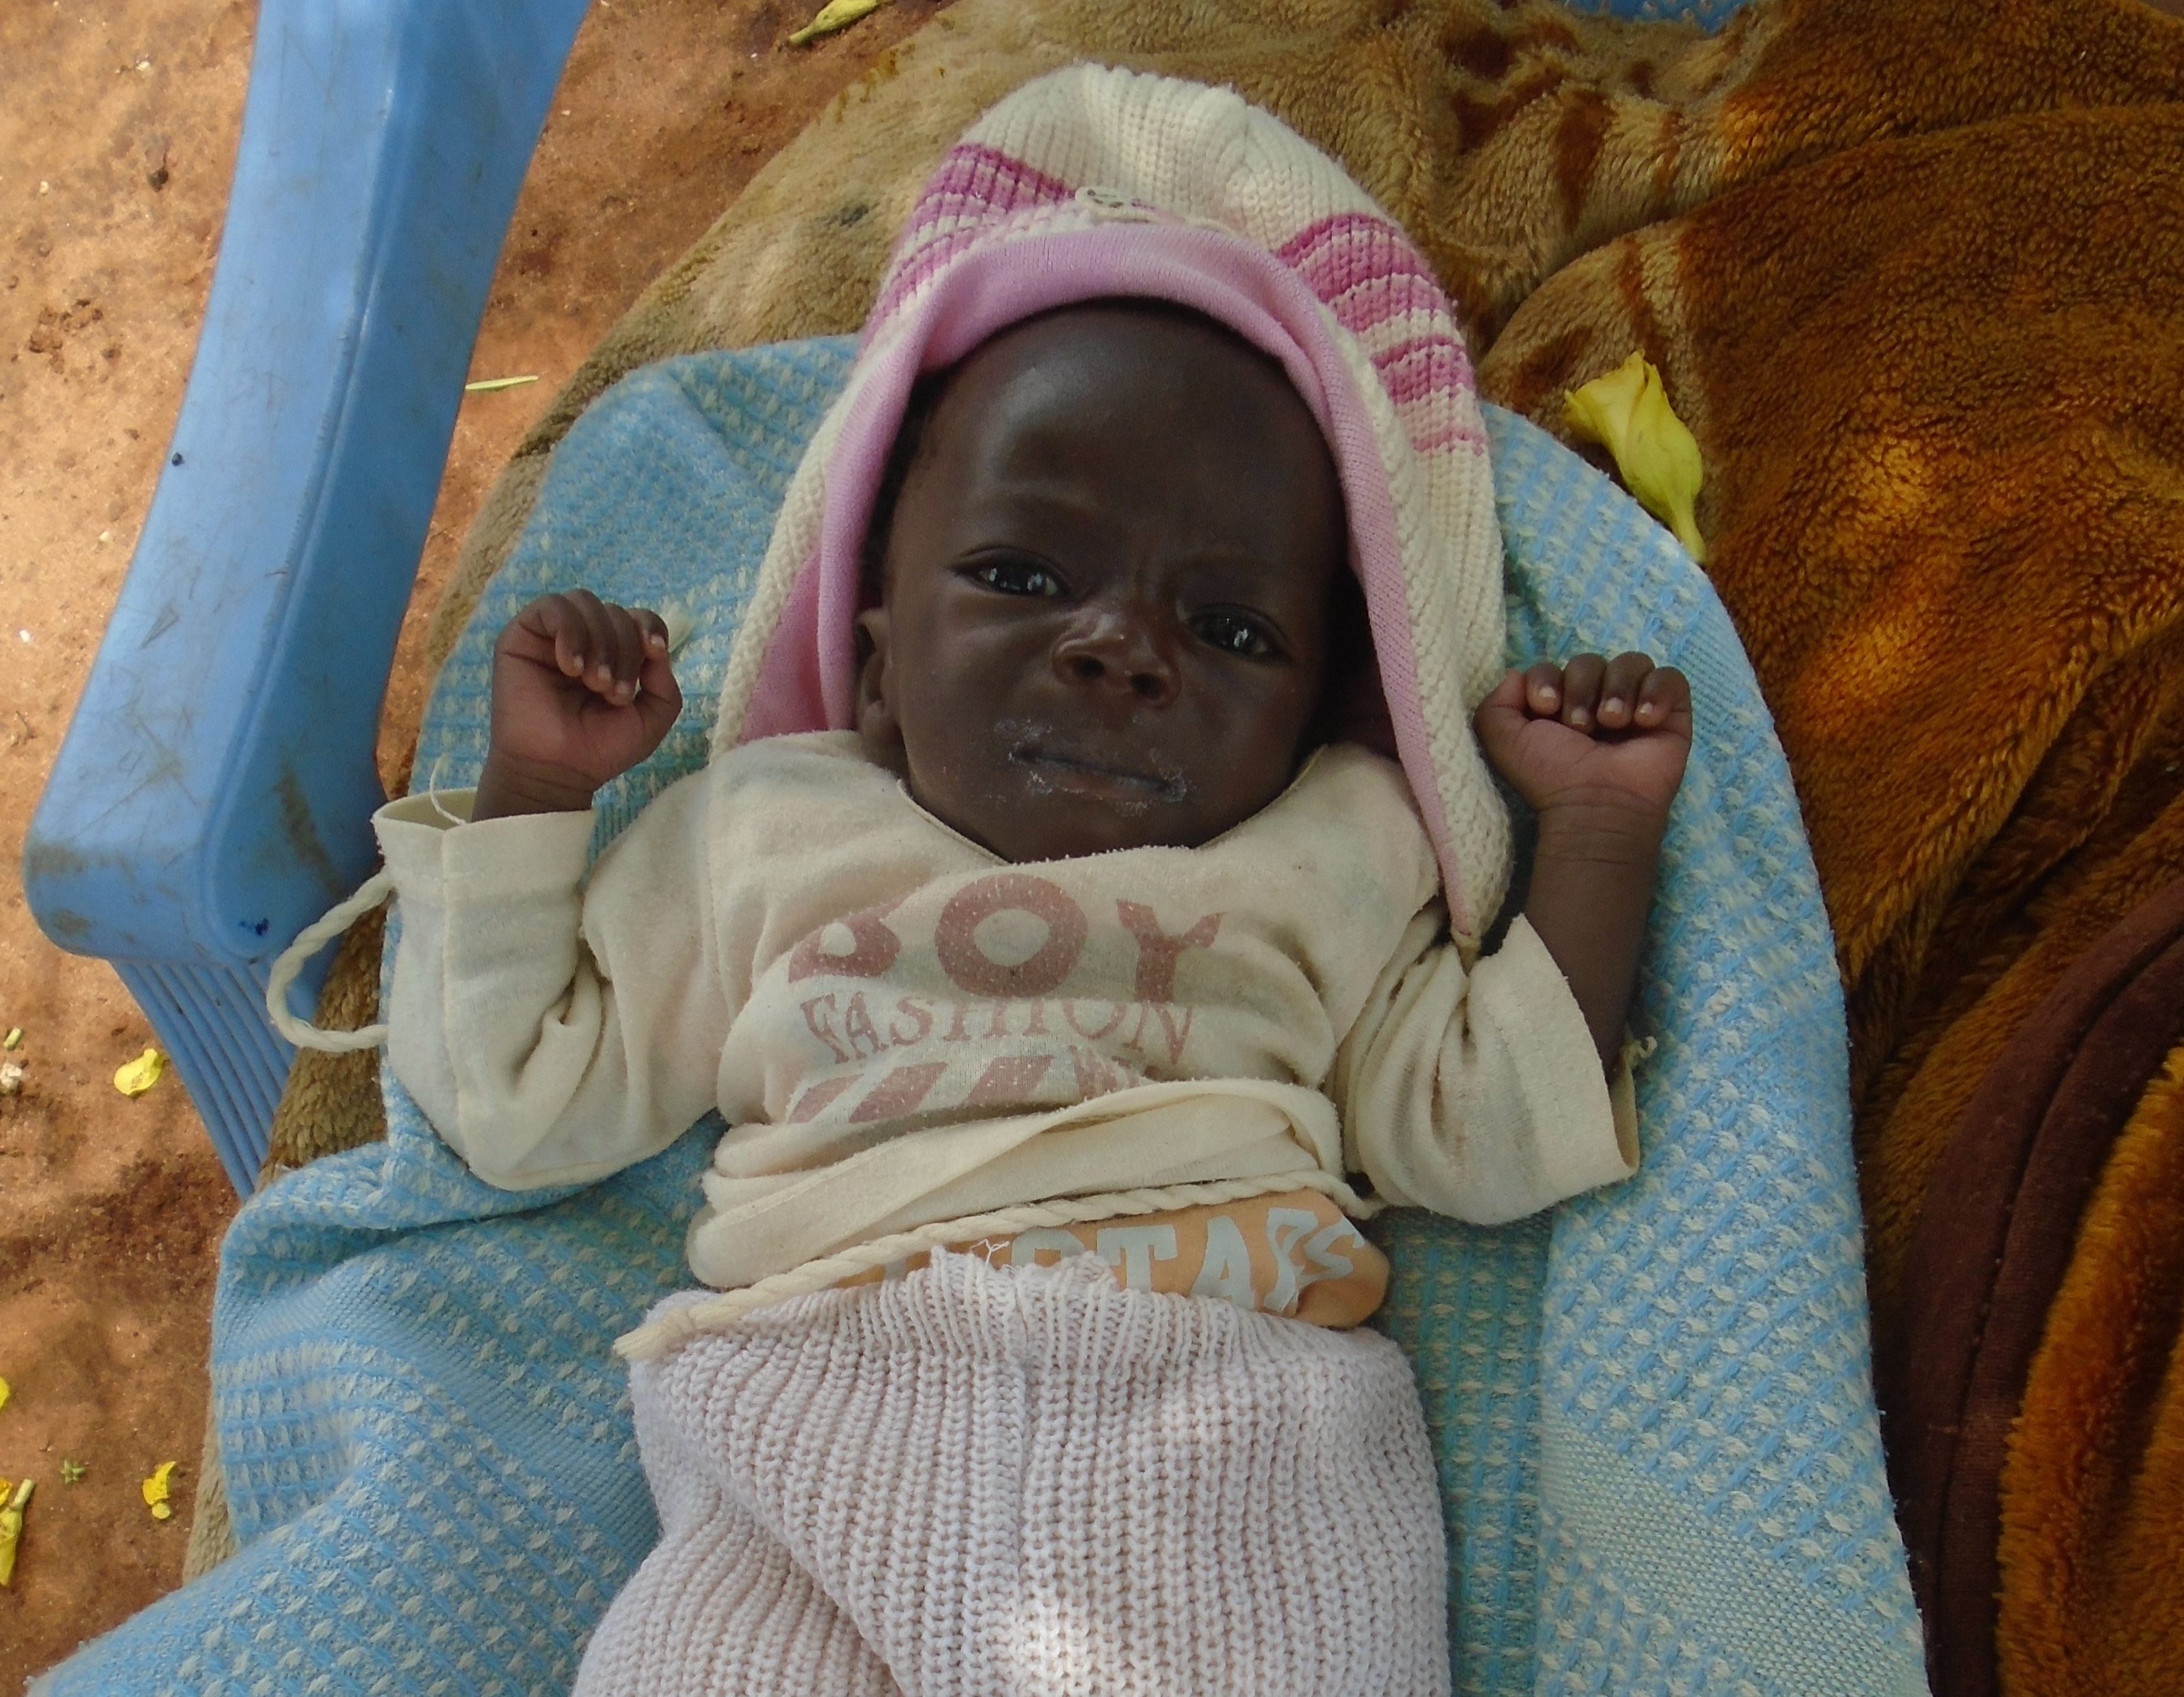 Gedion, at one month old, was severely underweight and struggling to survive